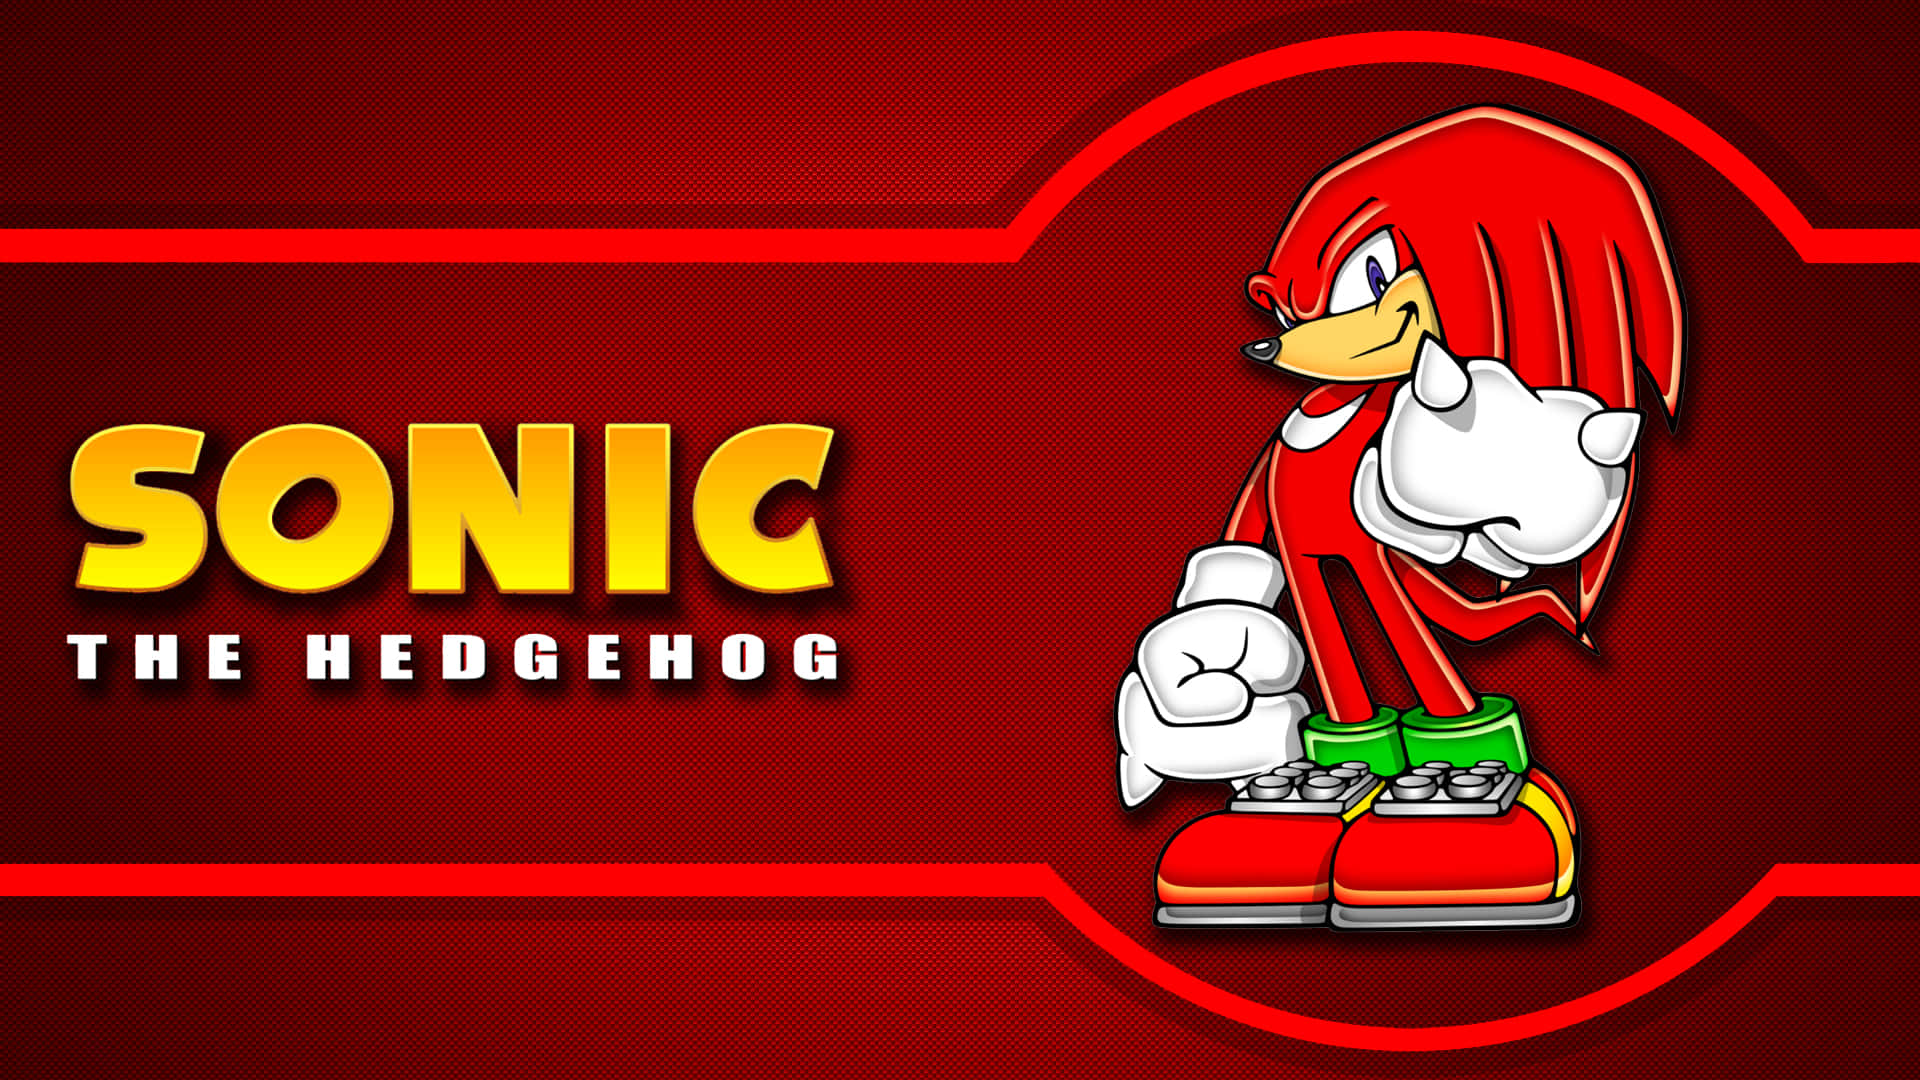 Knuckles, the echidna ready for action Wallpaper